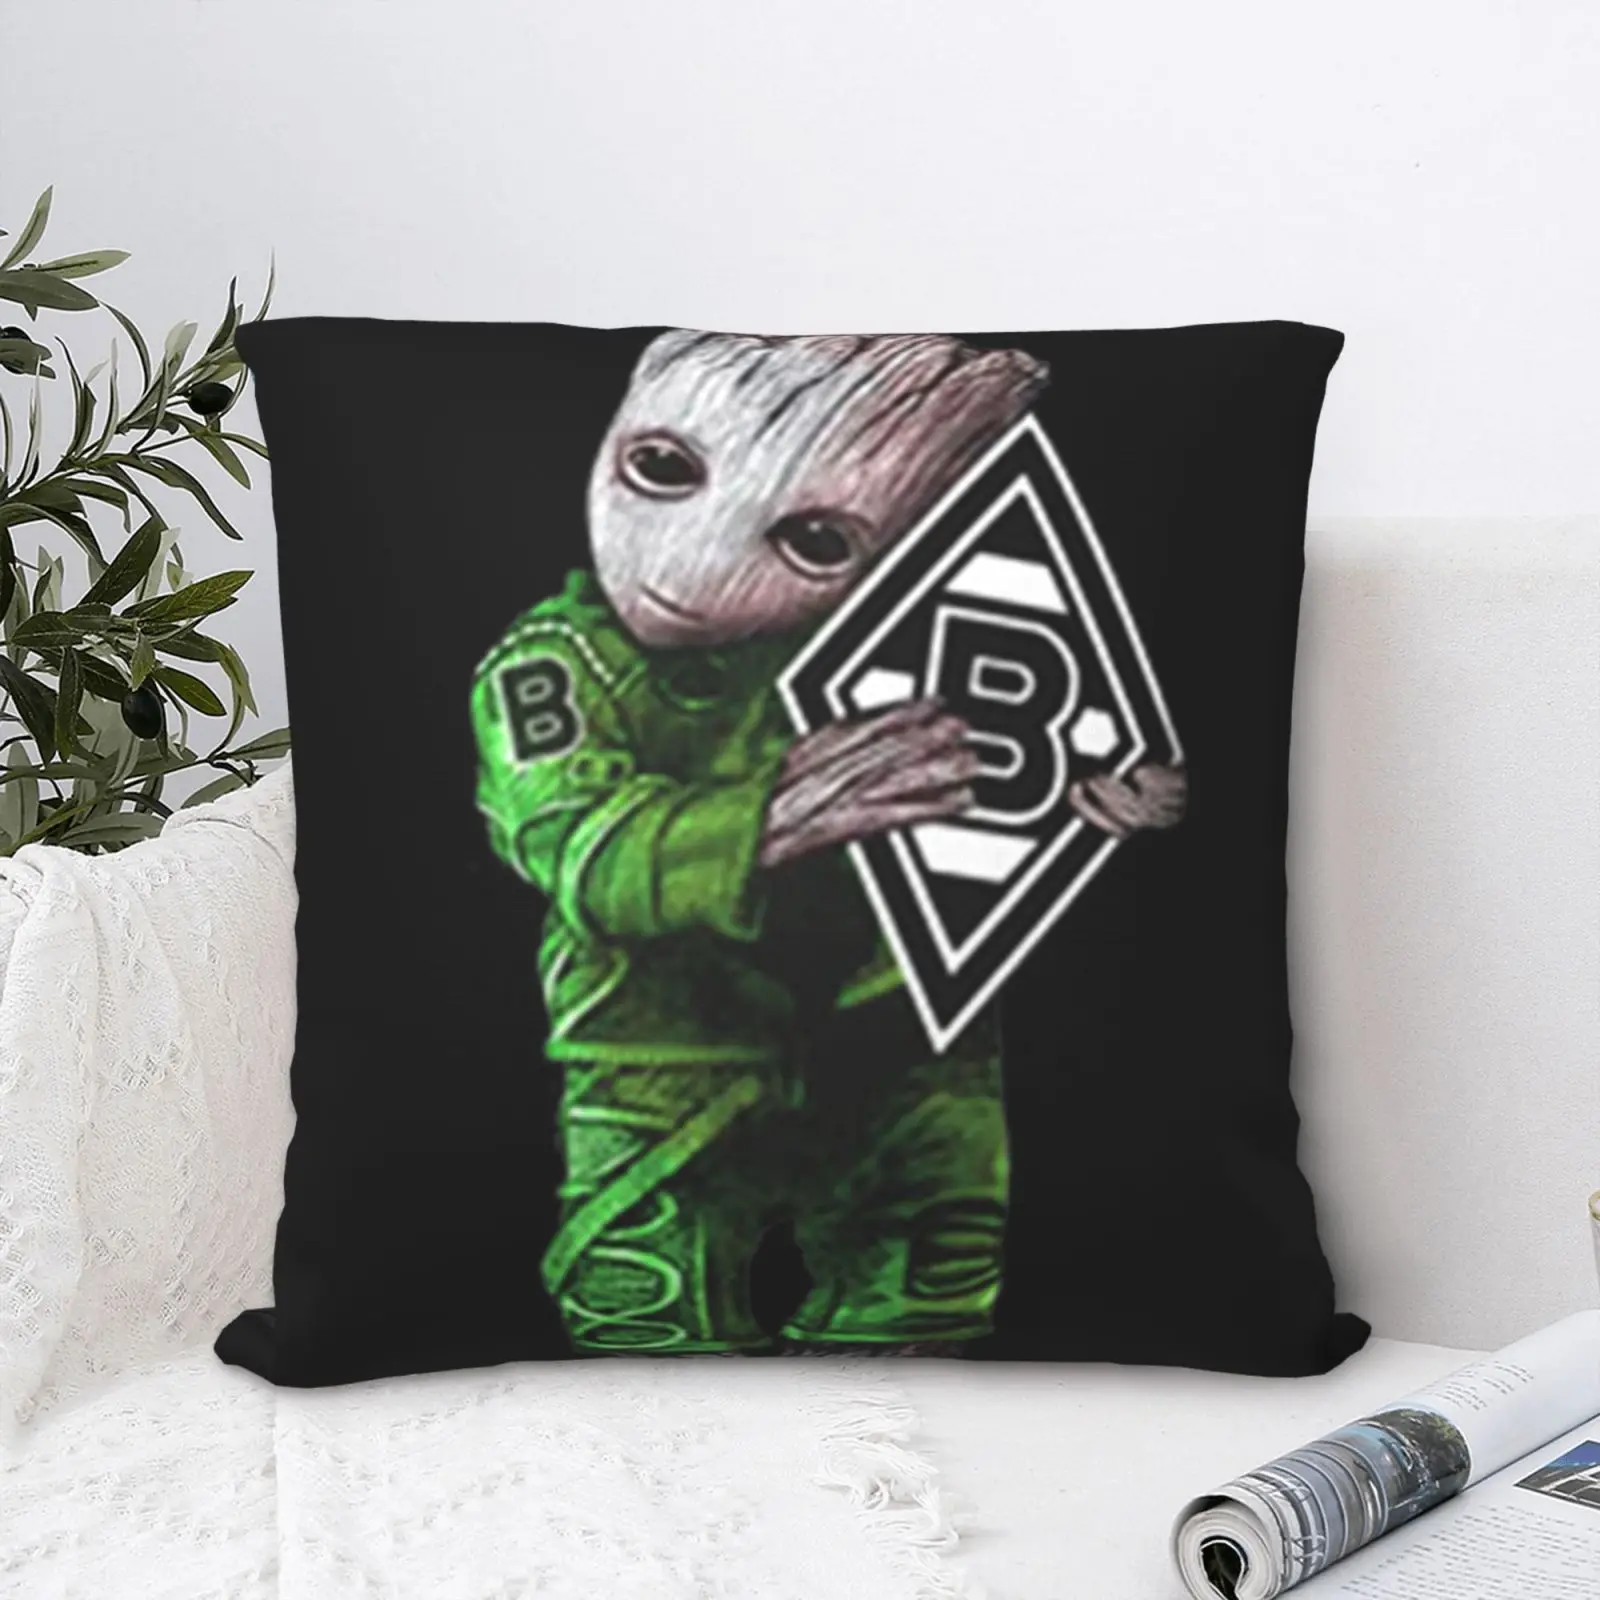 

Baby Groot Hug Borussia Monchengladbach Pillow Case Anime With Zipper Soft Cushion Big Size Ornamental Pillows For Living Room